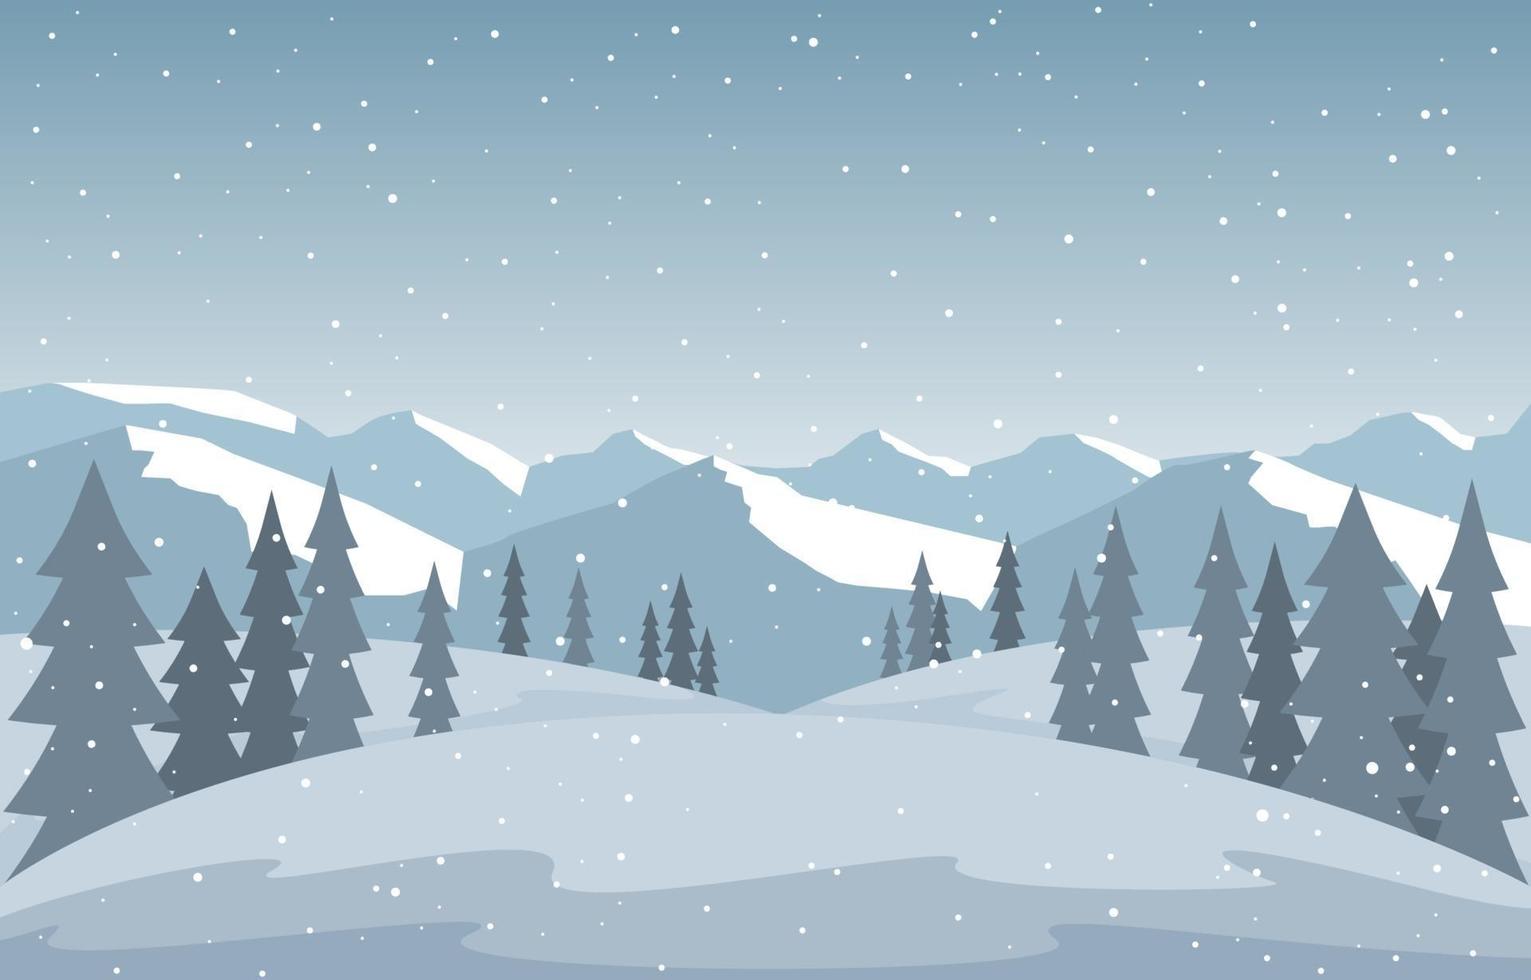 Snowy Winter Landscape with Trees, Mountains, and Snowfall vector